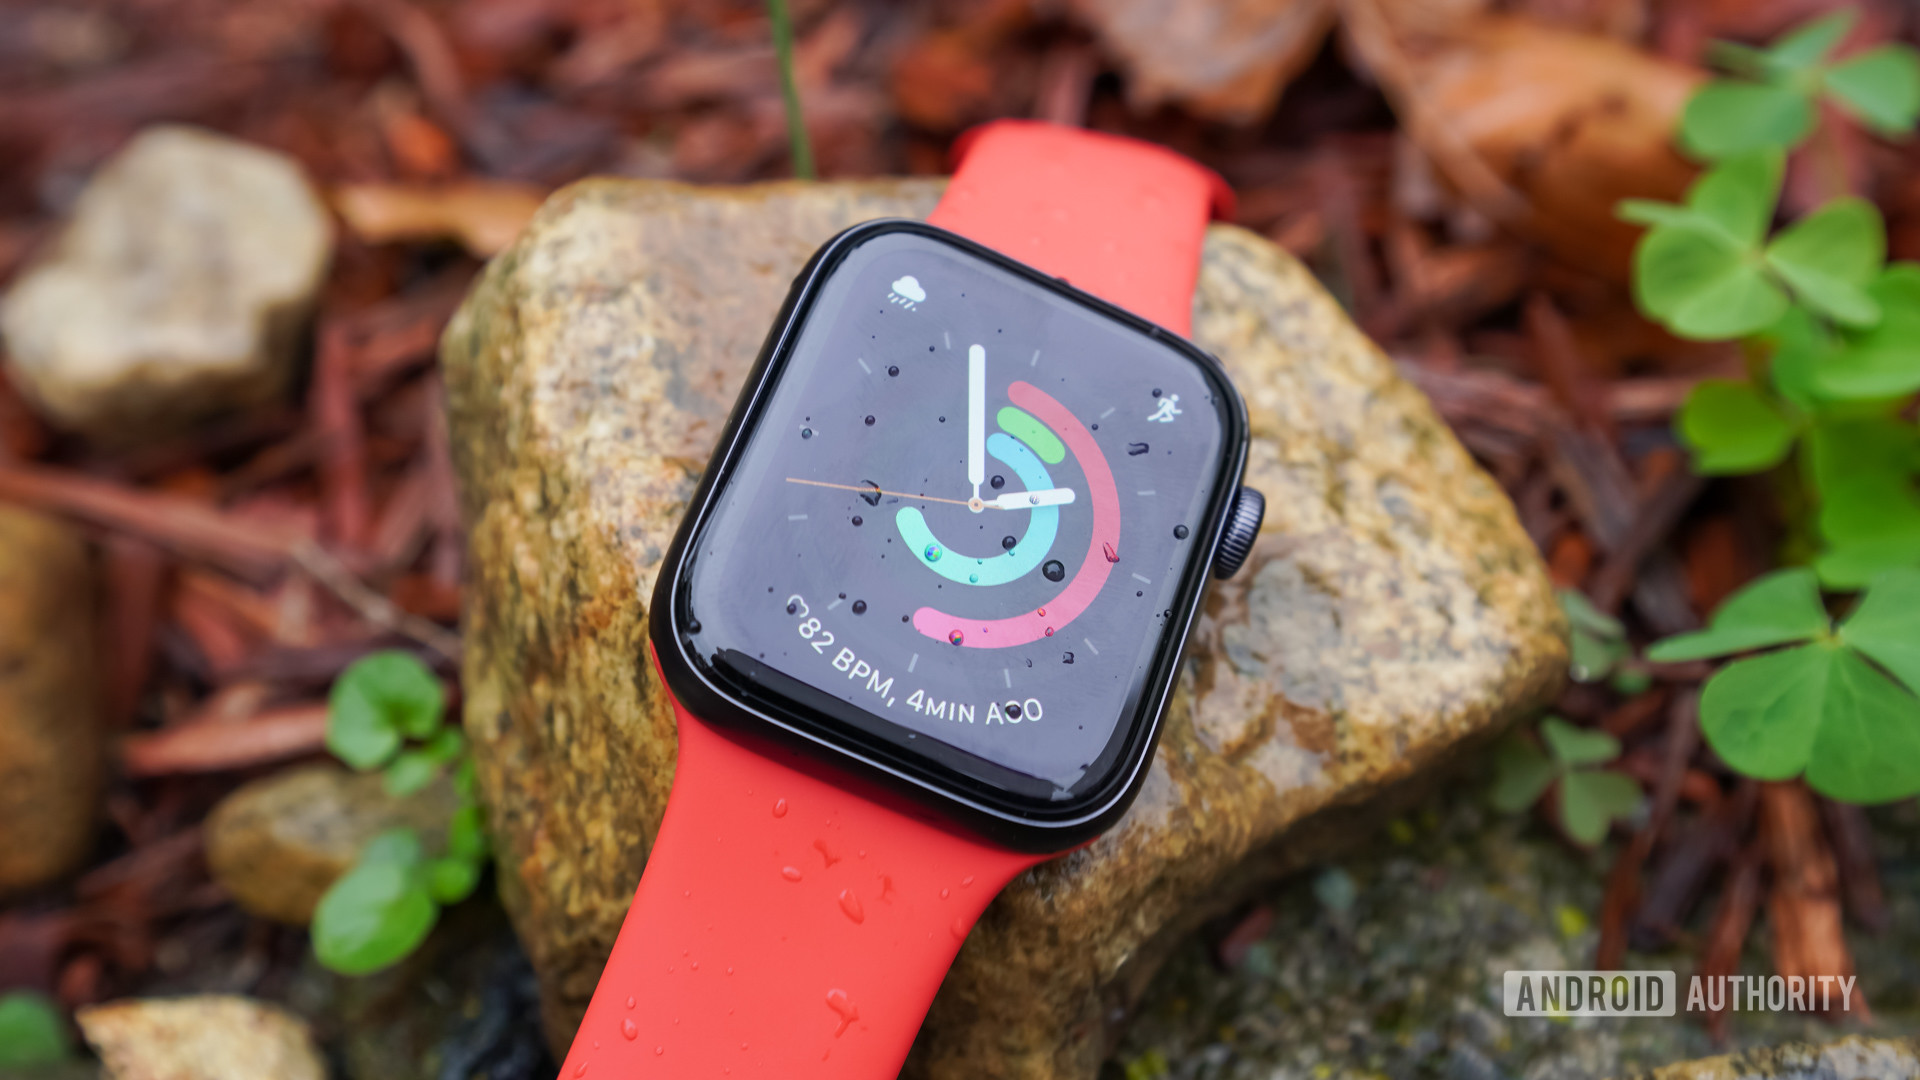 Apple Watch SE review: The smartwatch for the masses